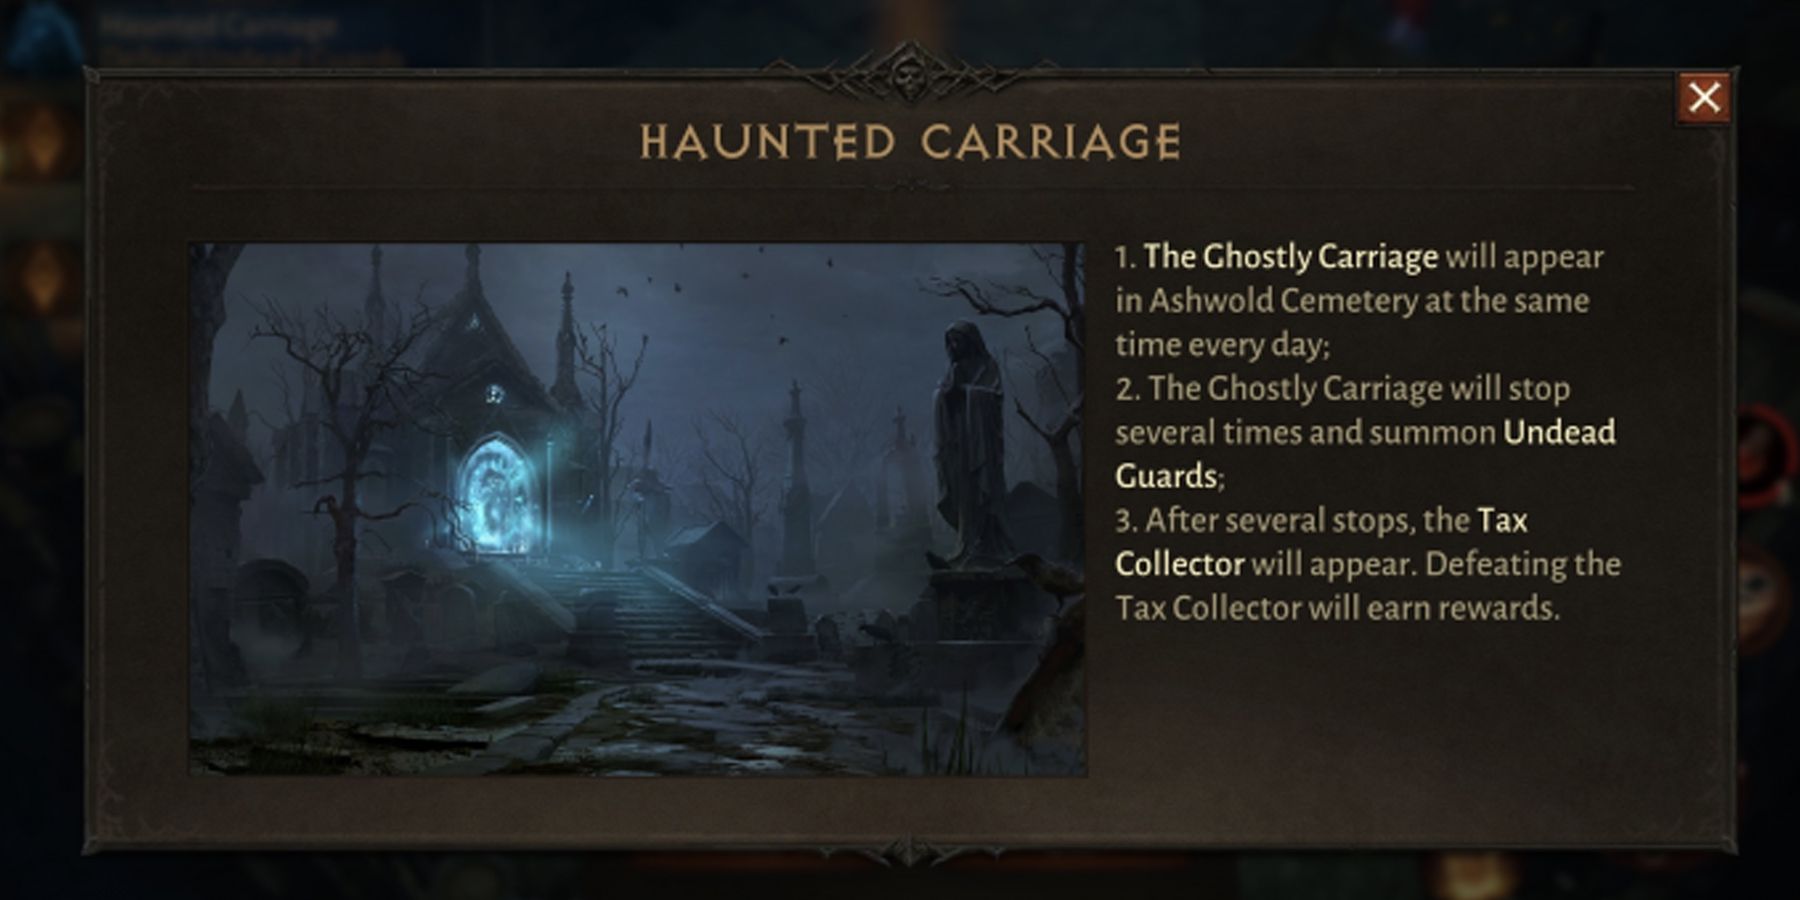 The Haunted Carriage Event Indicator